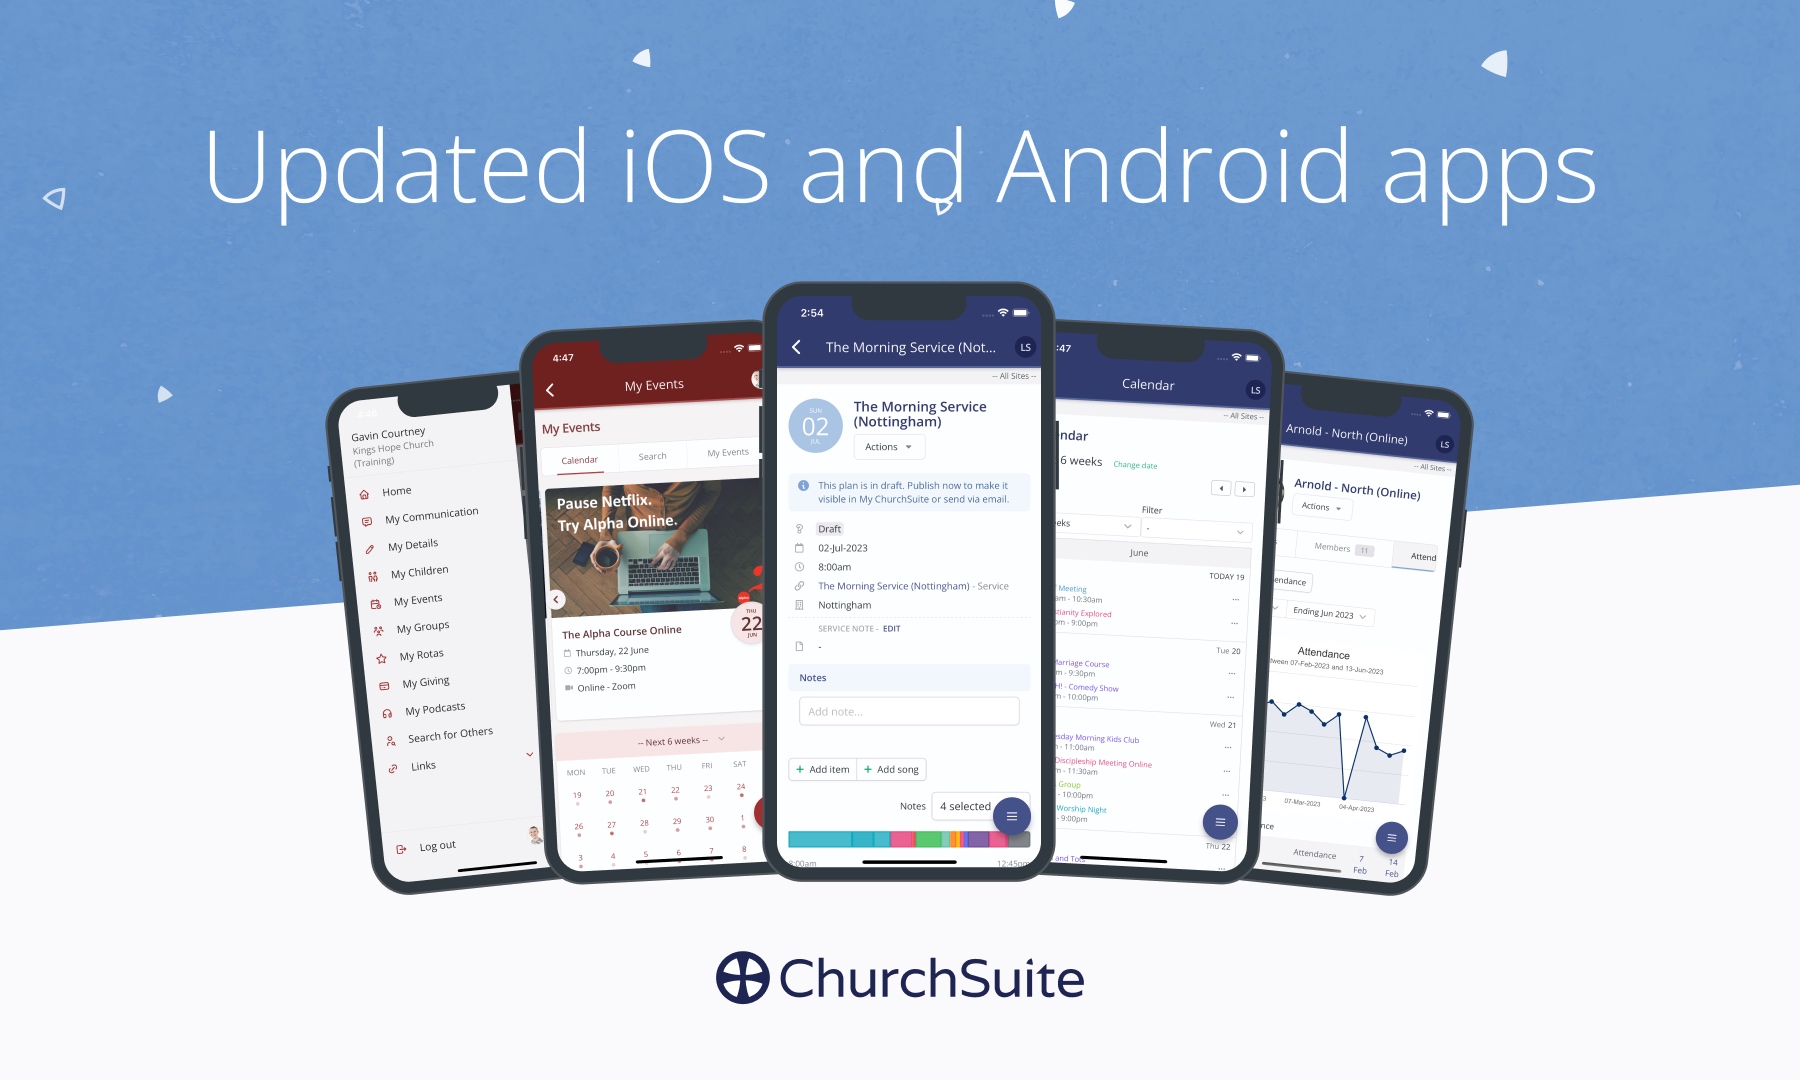 The new ChurchSuite app